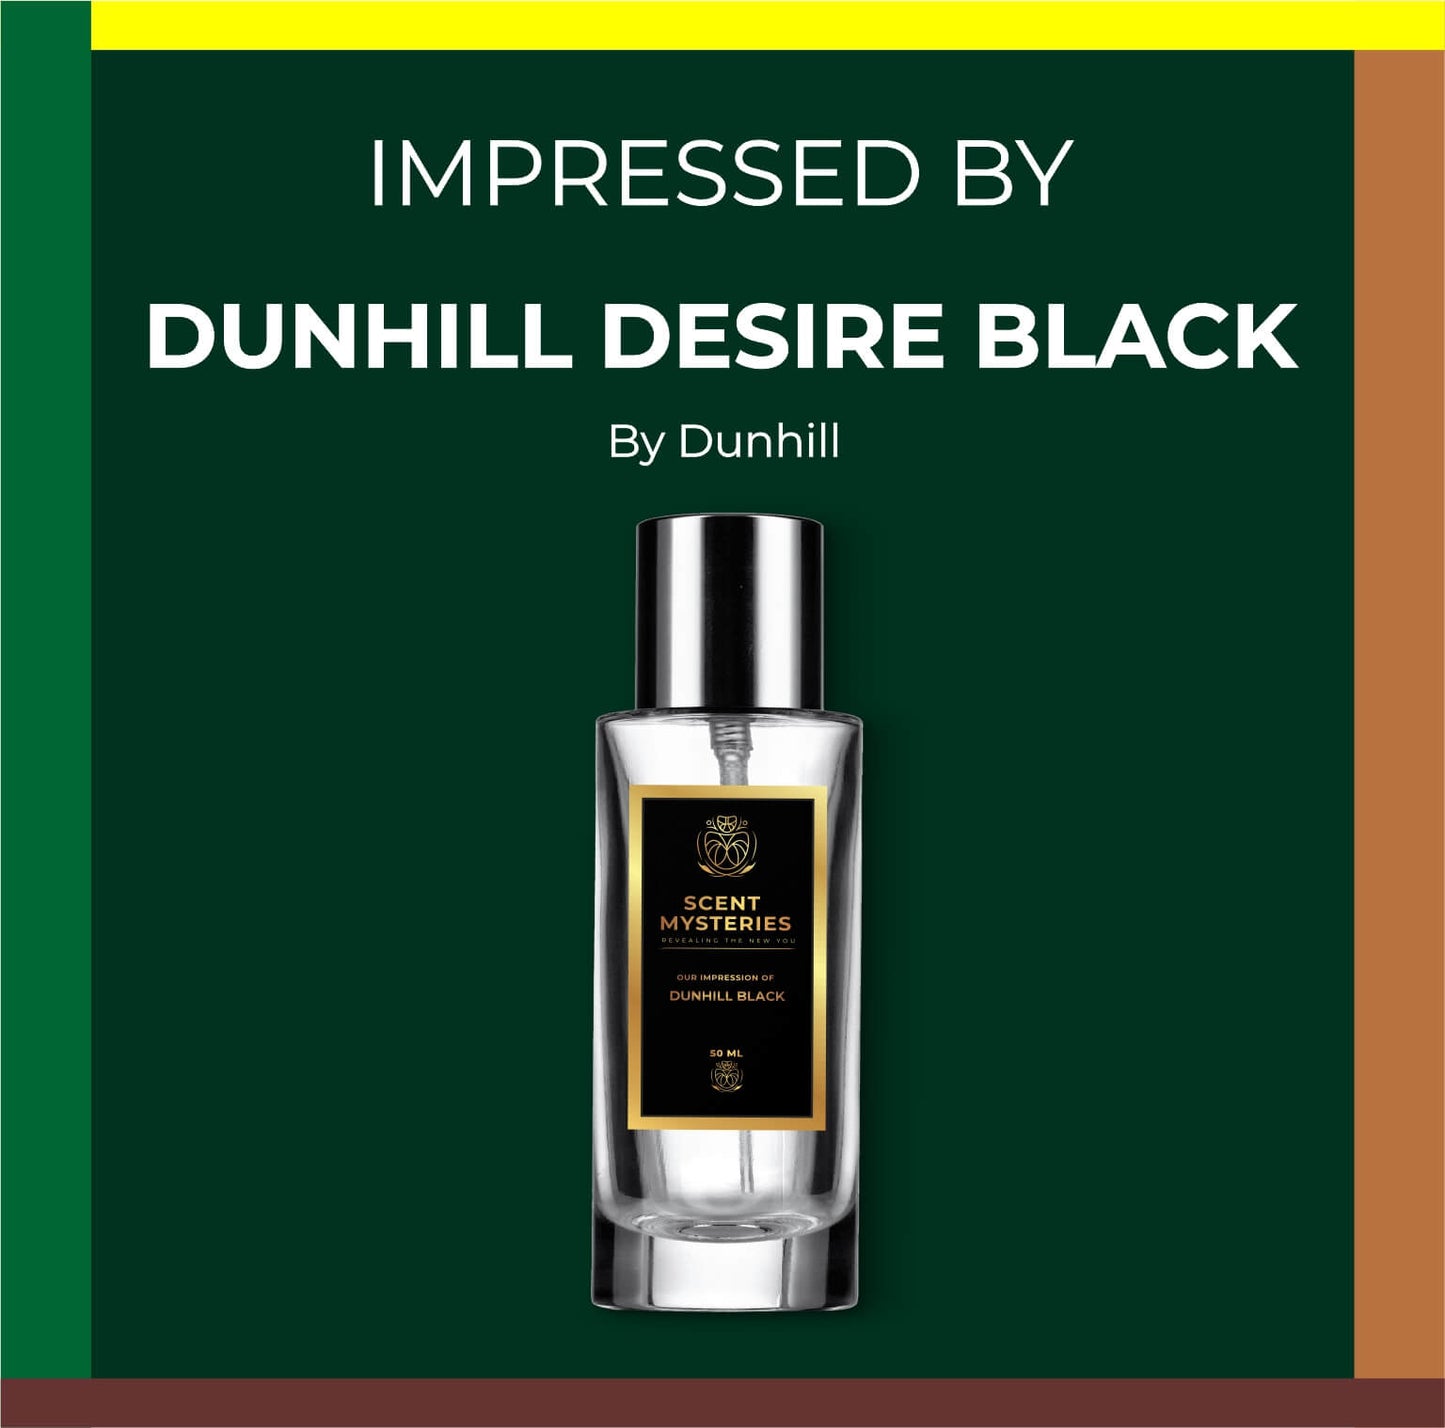 Our Impression of Dunhill Desire Black